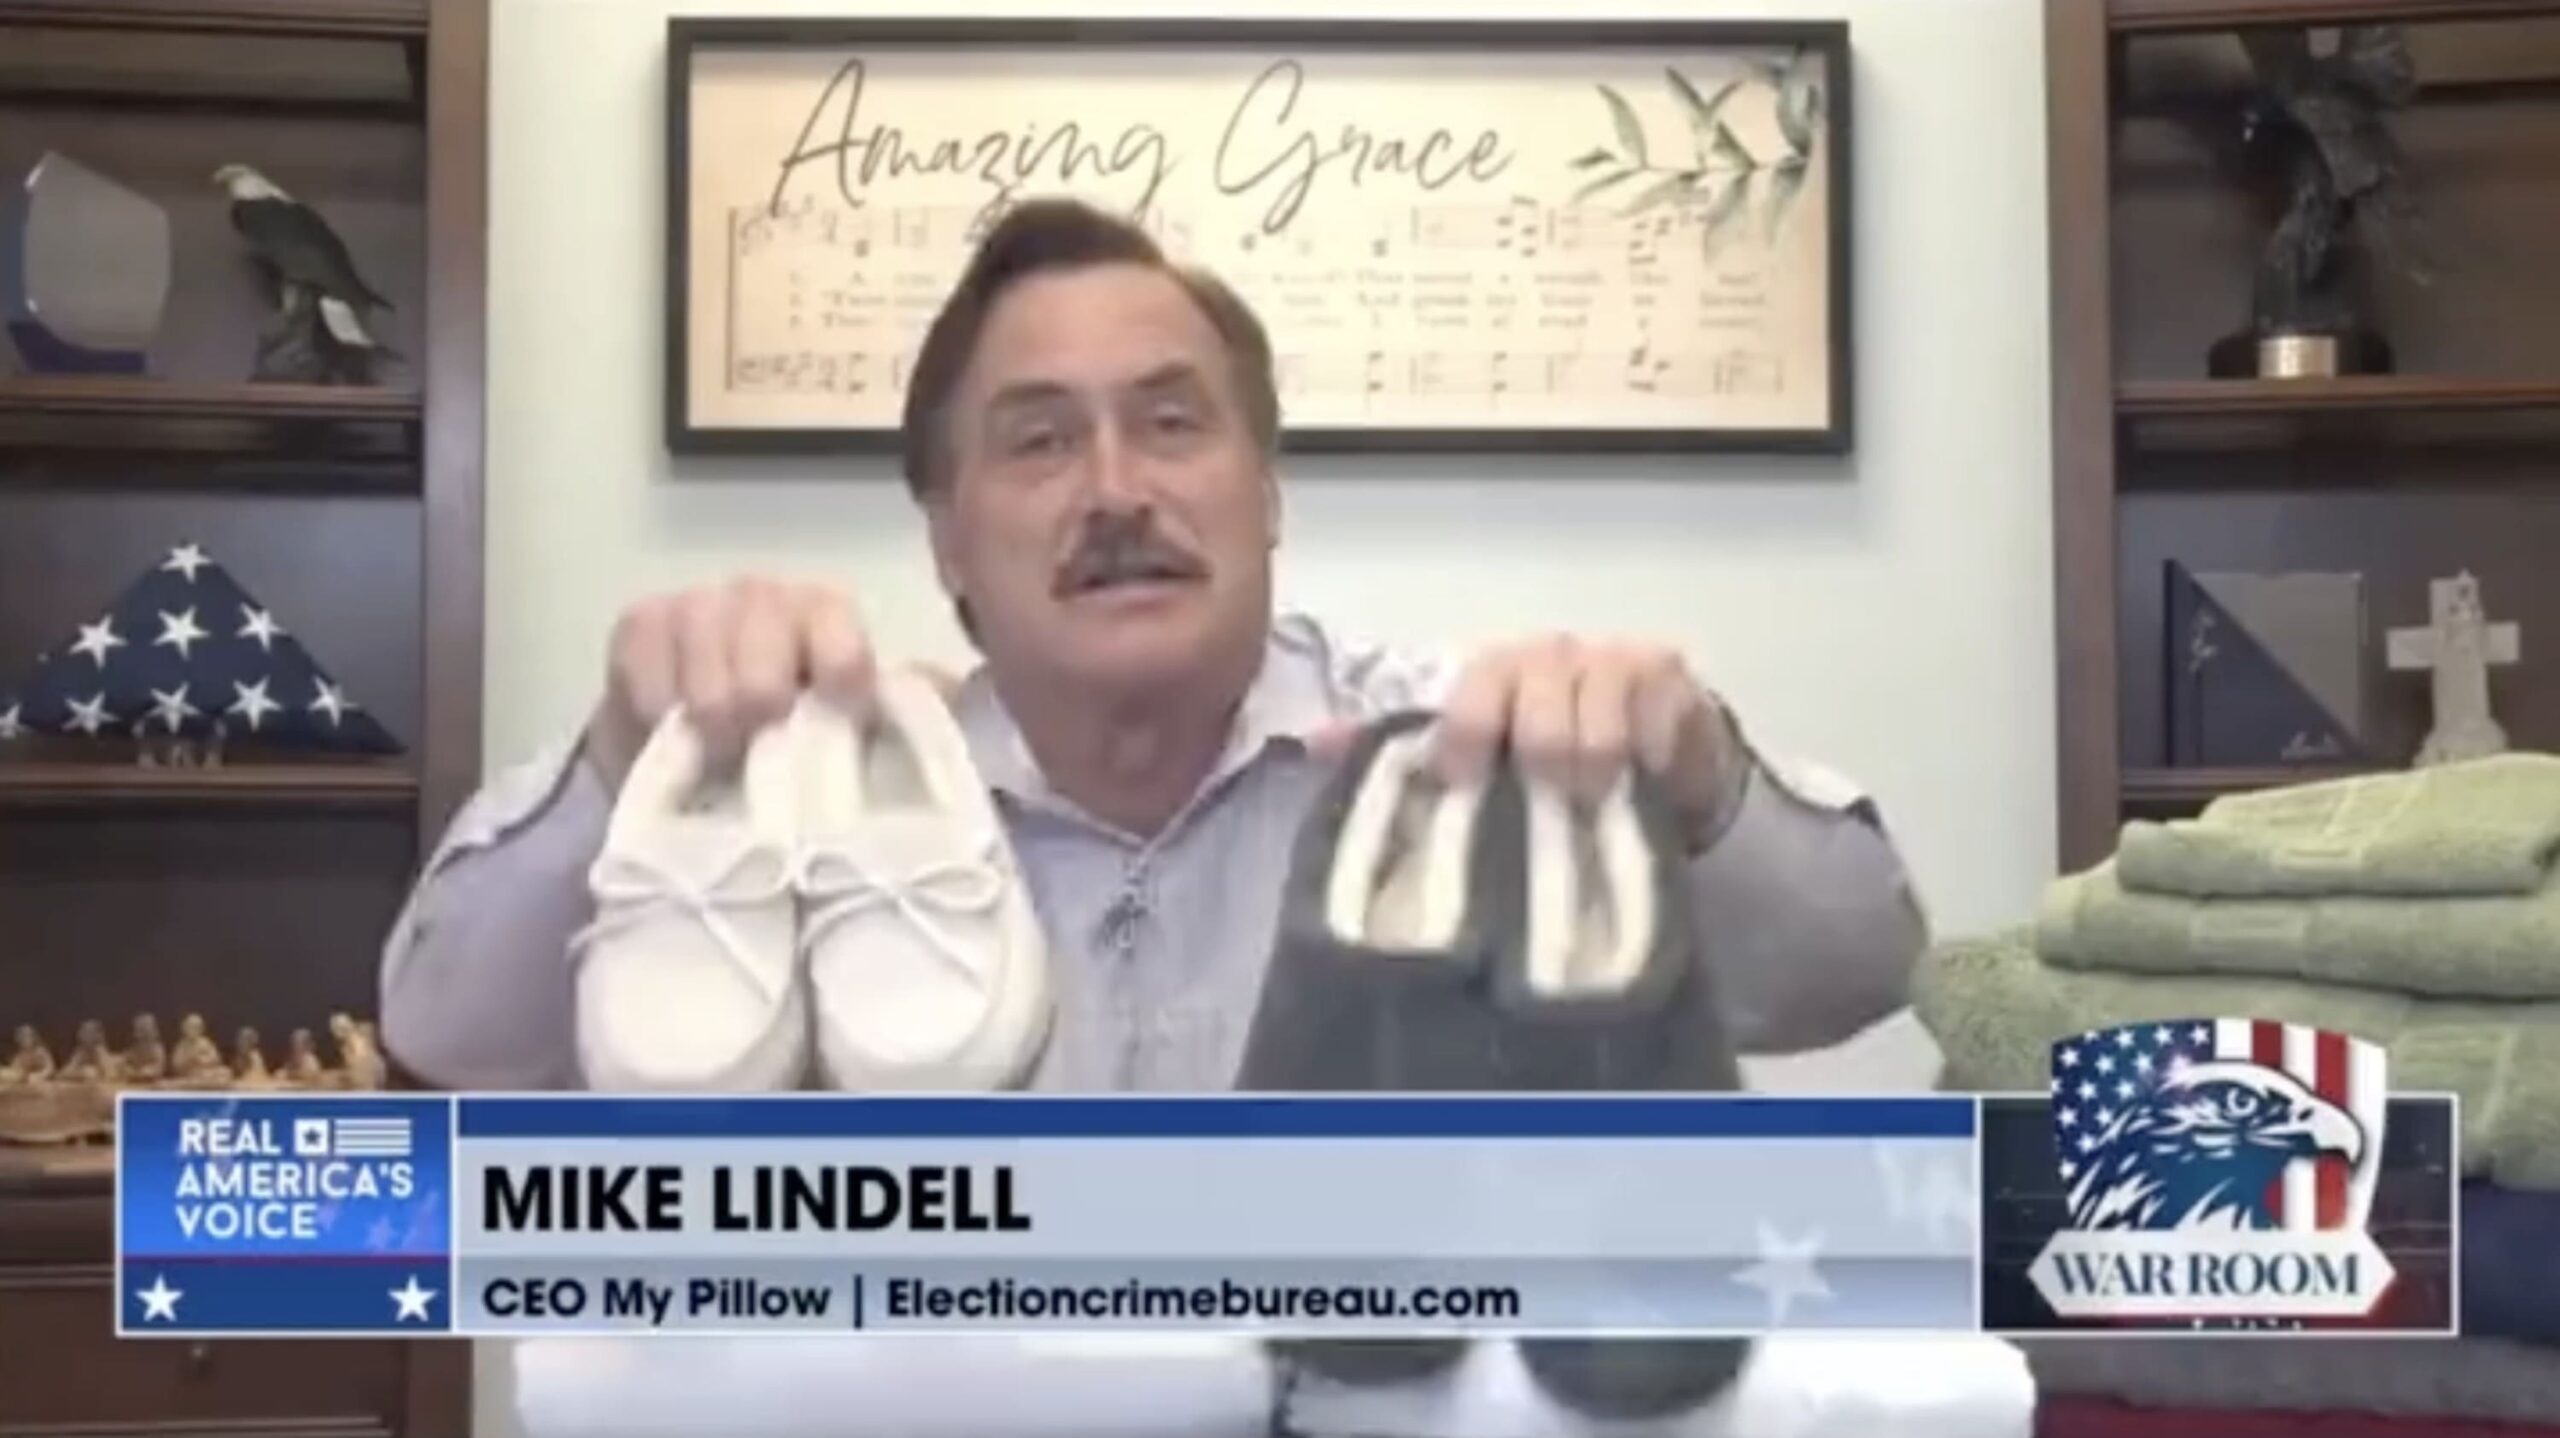 JUST IN: American Express Cuts Mike Lindell’s MyPillow’s Credit Line by 90% After 15-Year Partnership (VIDEO)